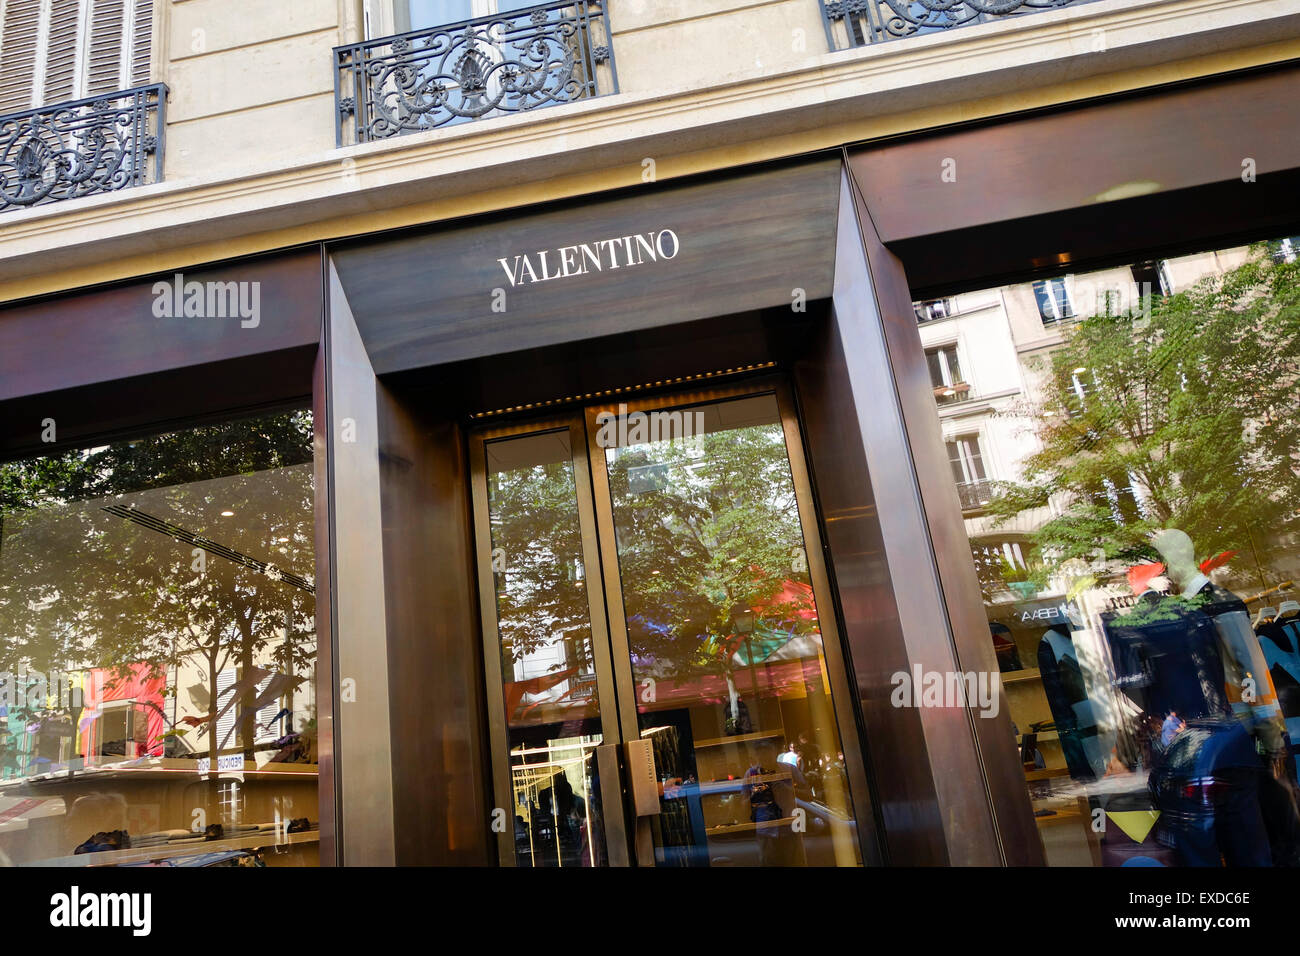 Valentino stock photography and images - Alamy